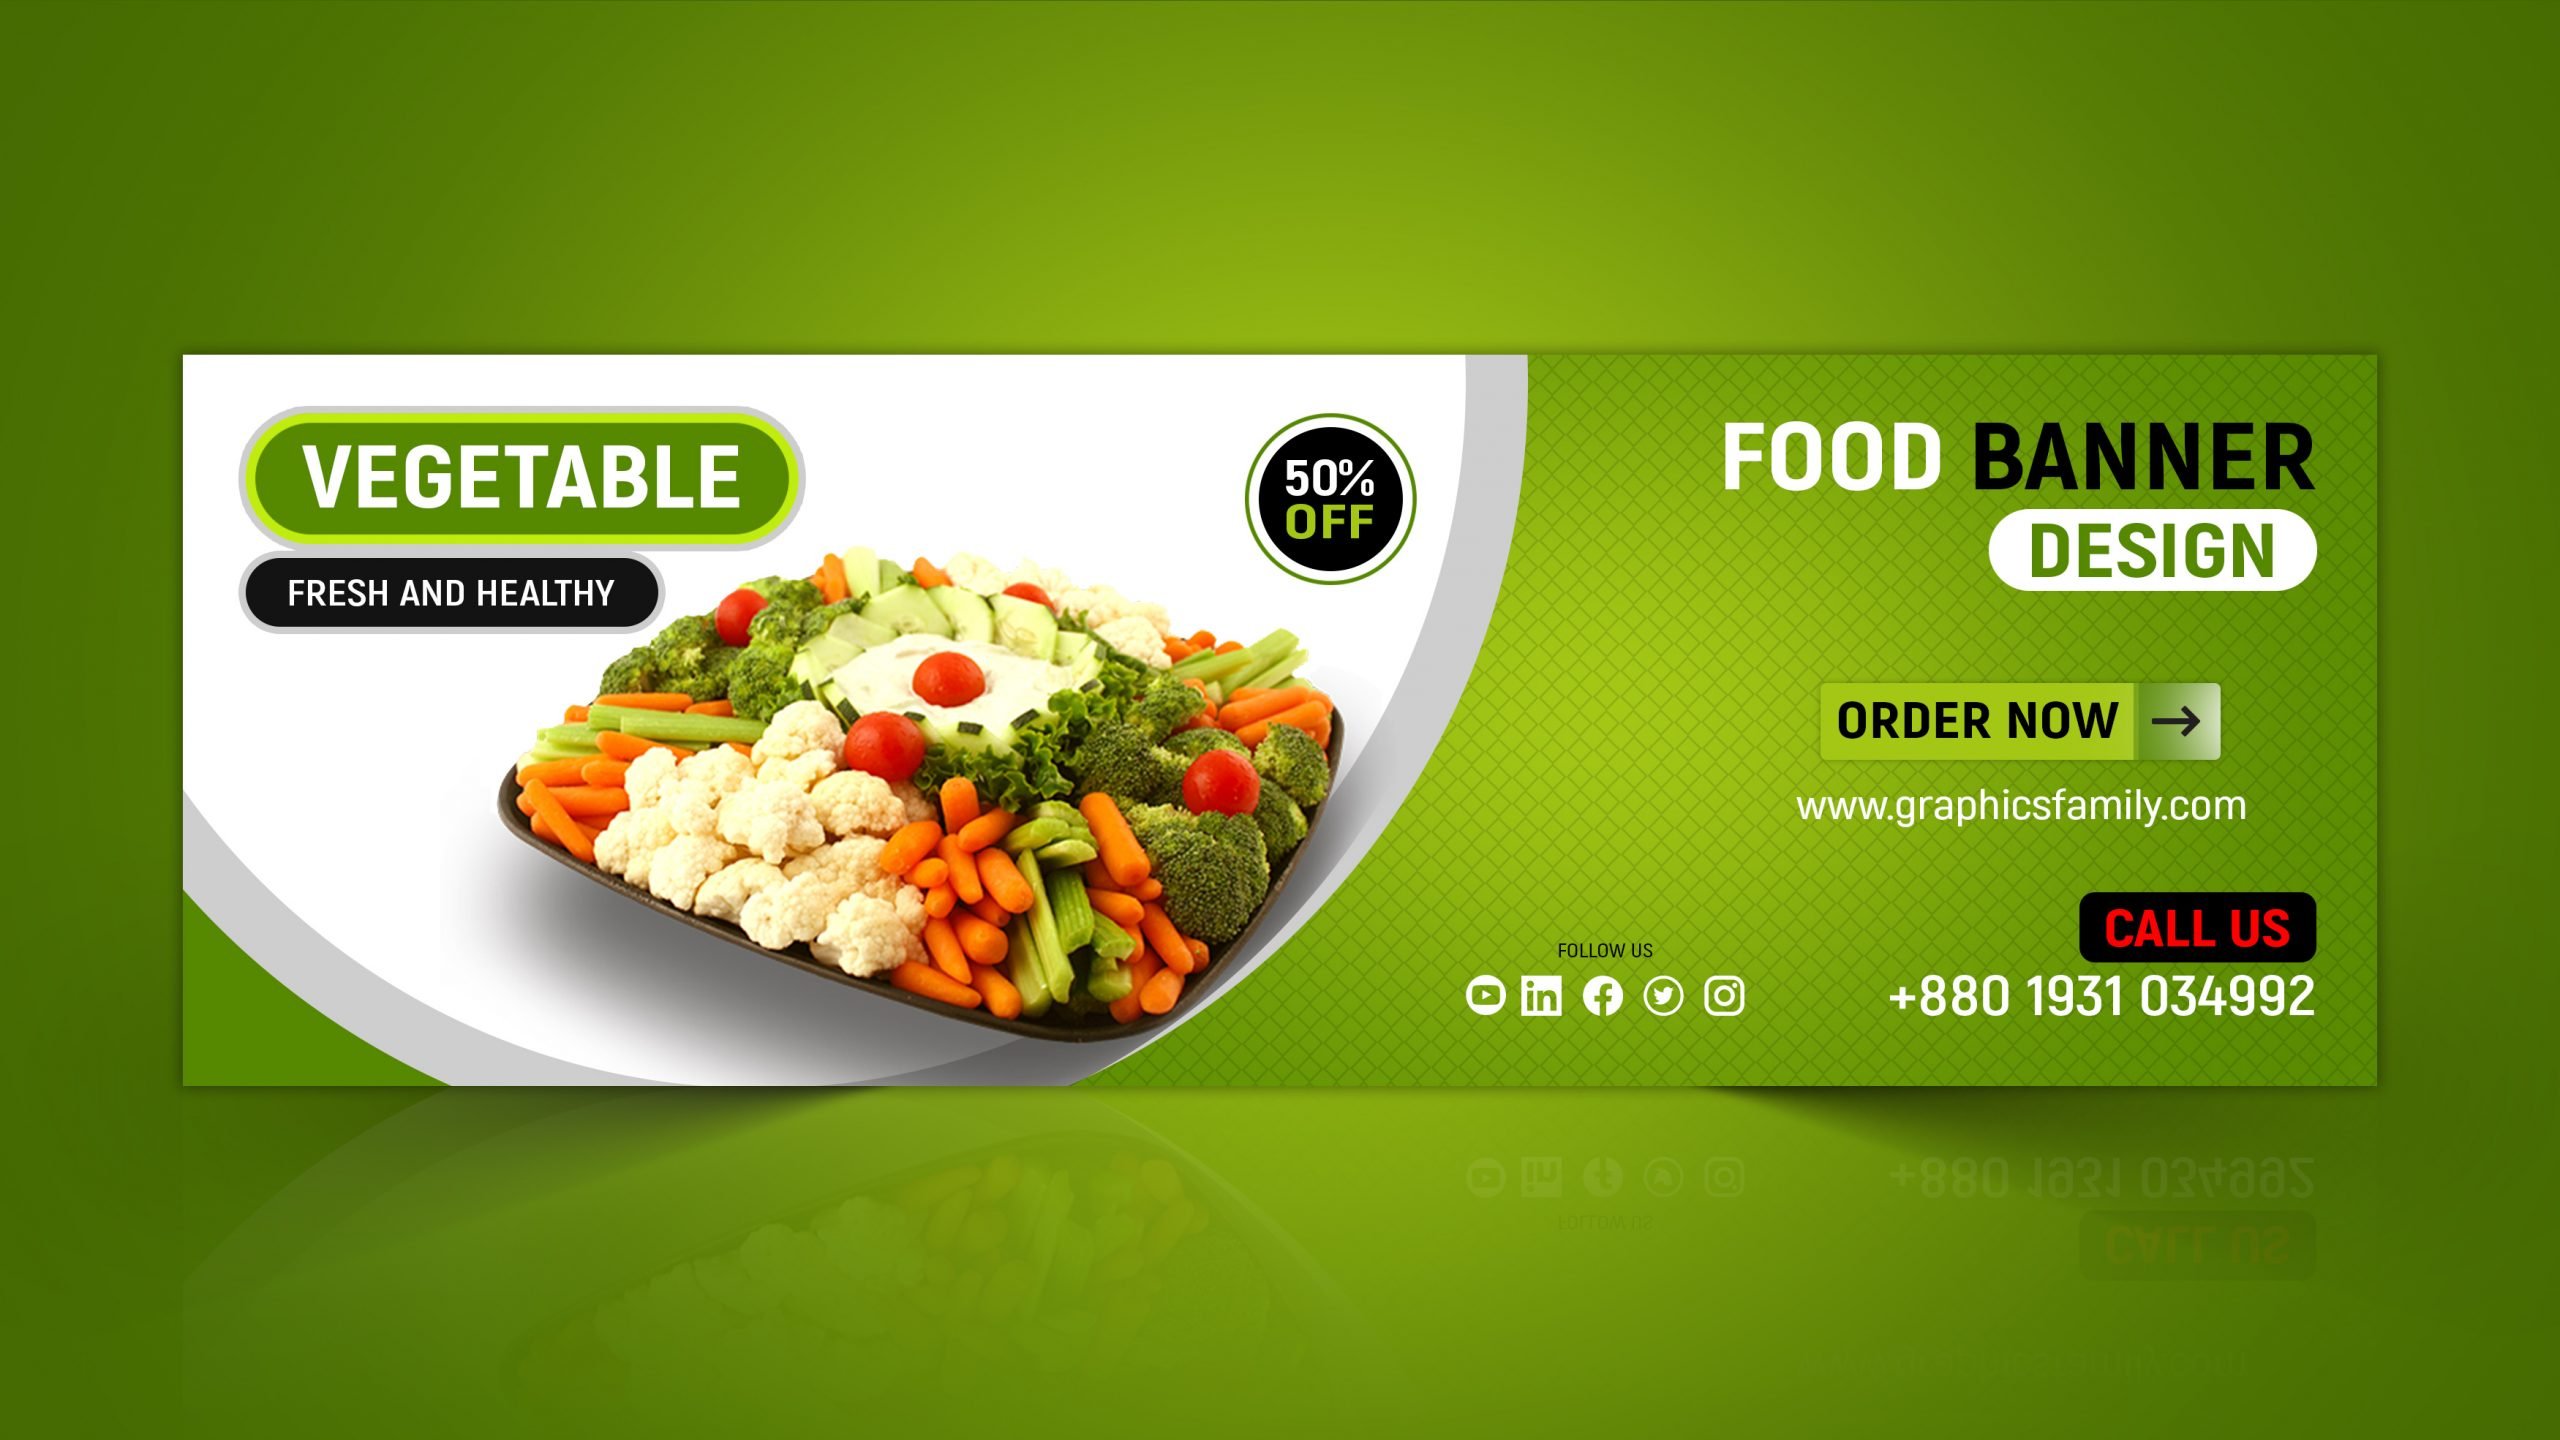 fresh-and-healthy-vegetables-banner-design-template-graphicsfamily